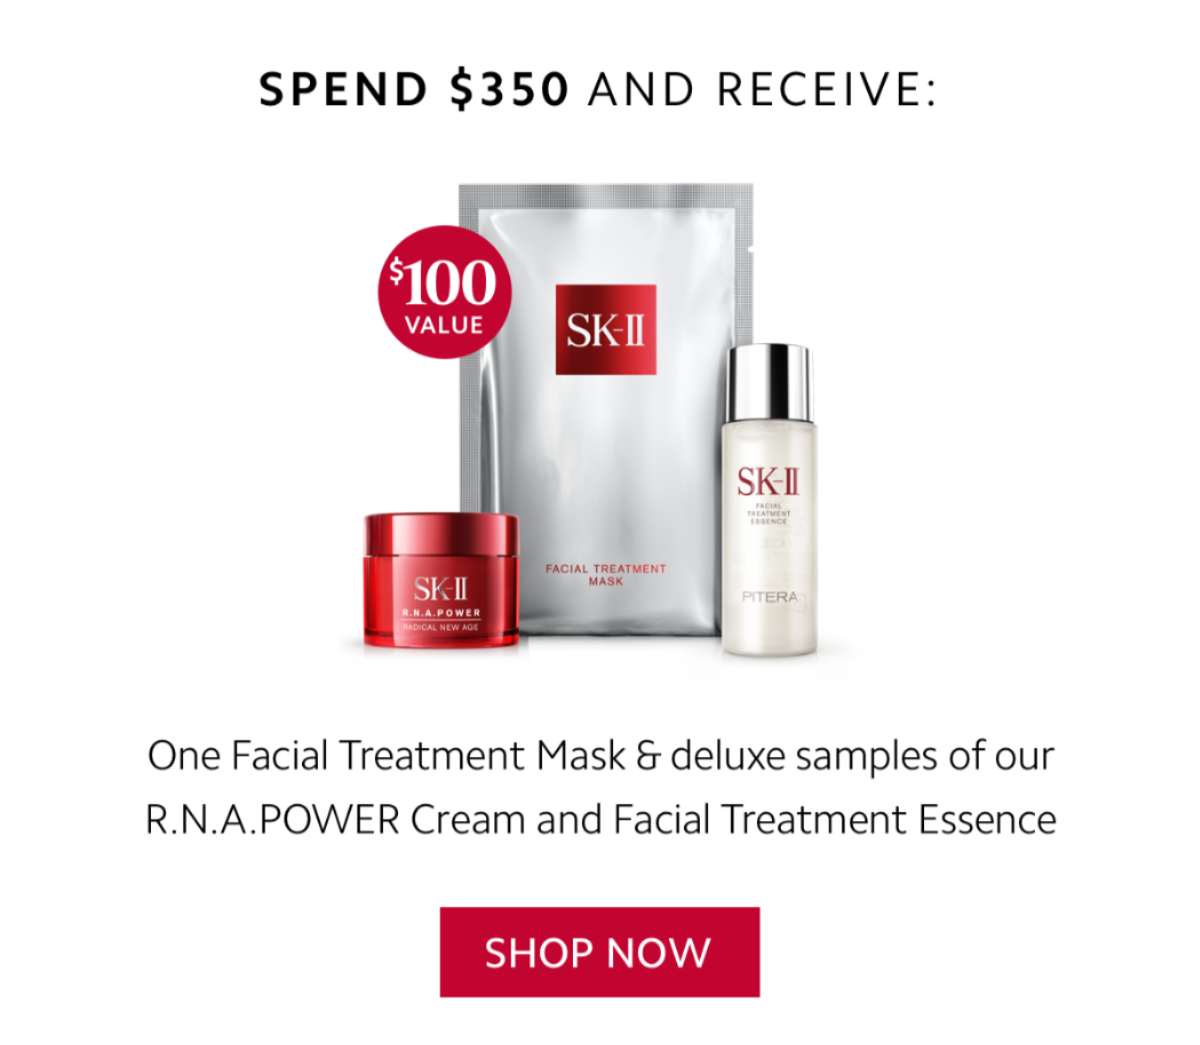 Spend $350 and receive: One Facial Treatment Mask & deluxe samples of our R.N.A.POWER Cream and Facial Treatment Essence ($100 value) - SHOP NOW